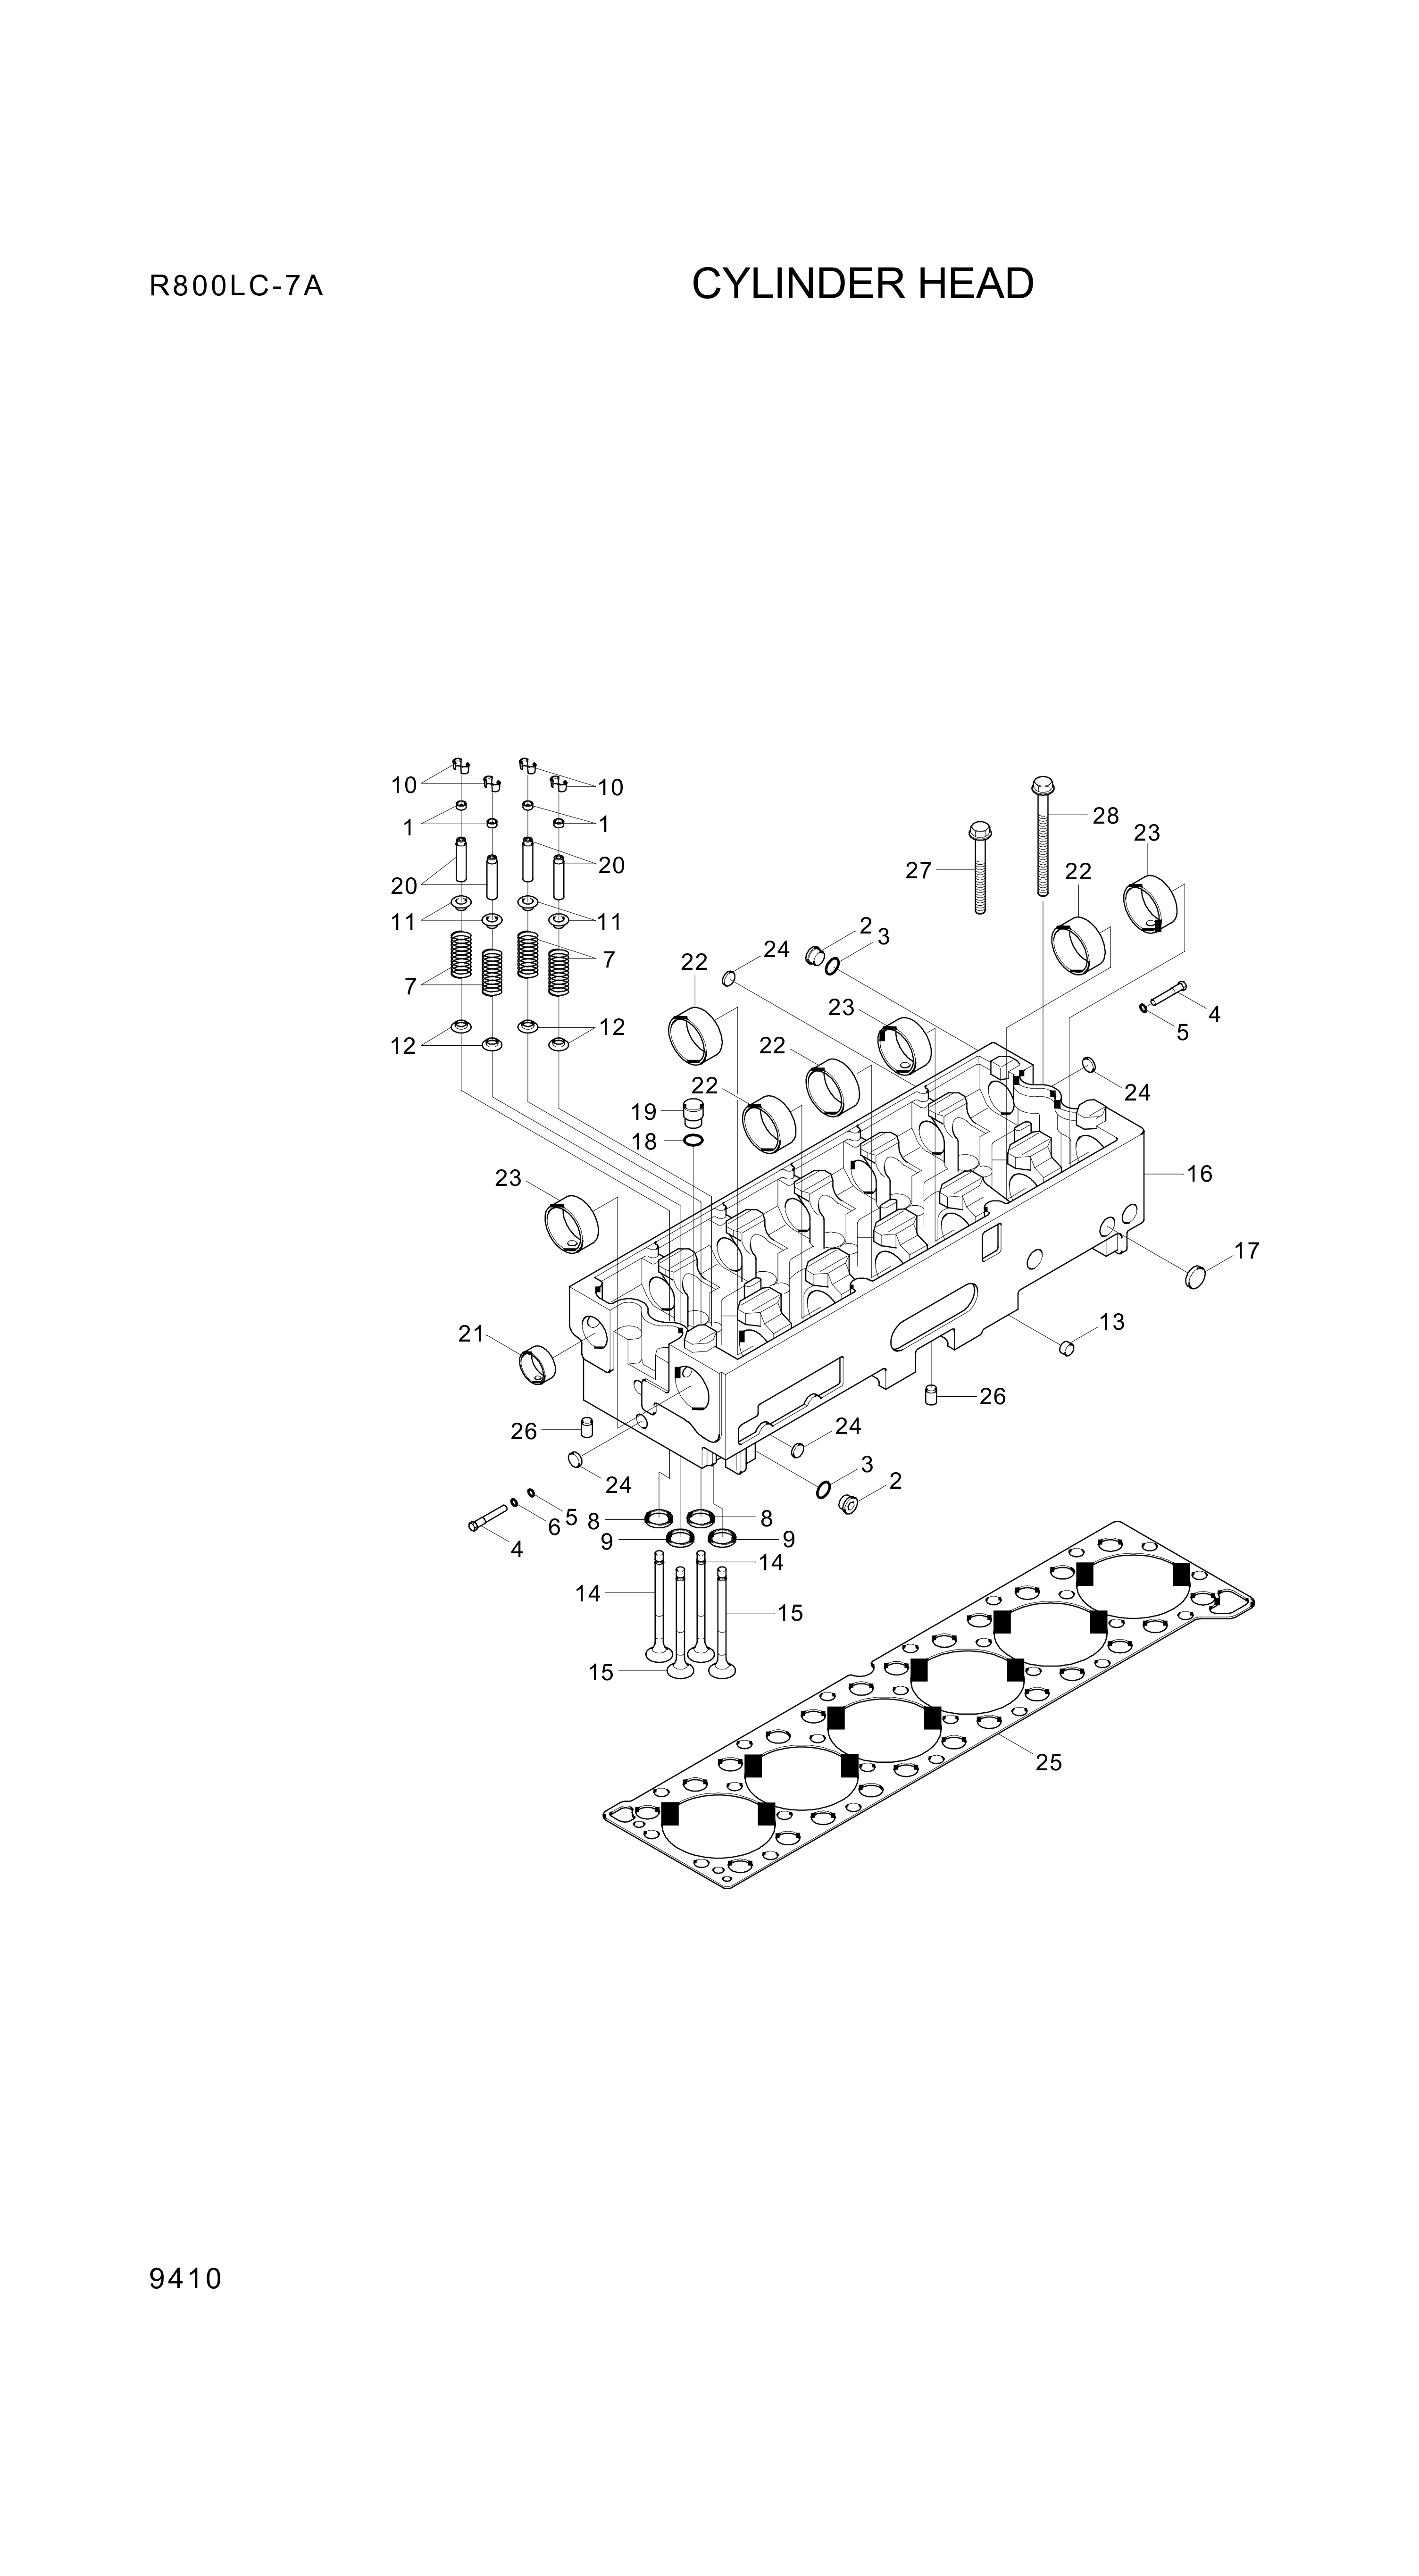 drawing for Hyundai Construction Equipment YUBP-05756 - GUIDE-VALVE SPRING (figure 1)